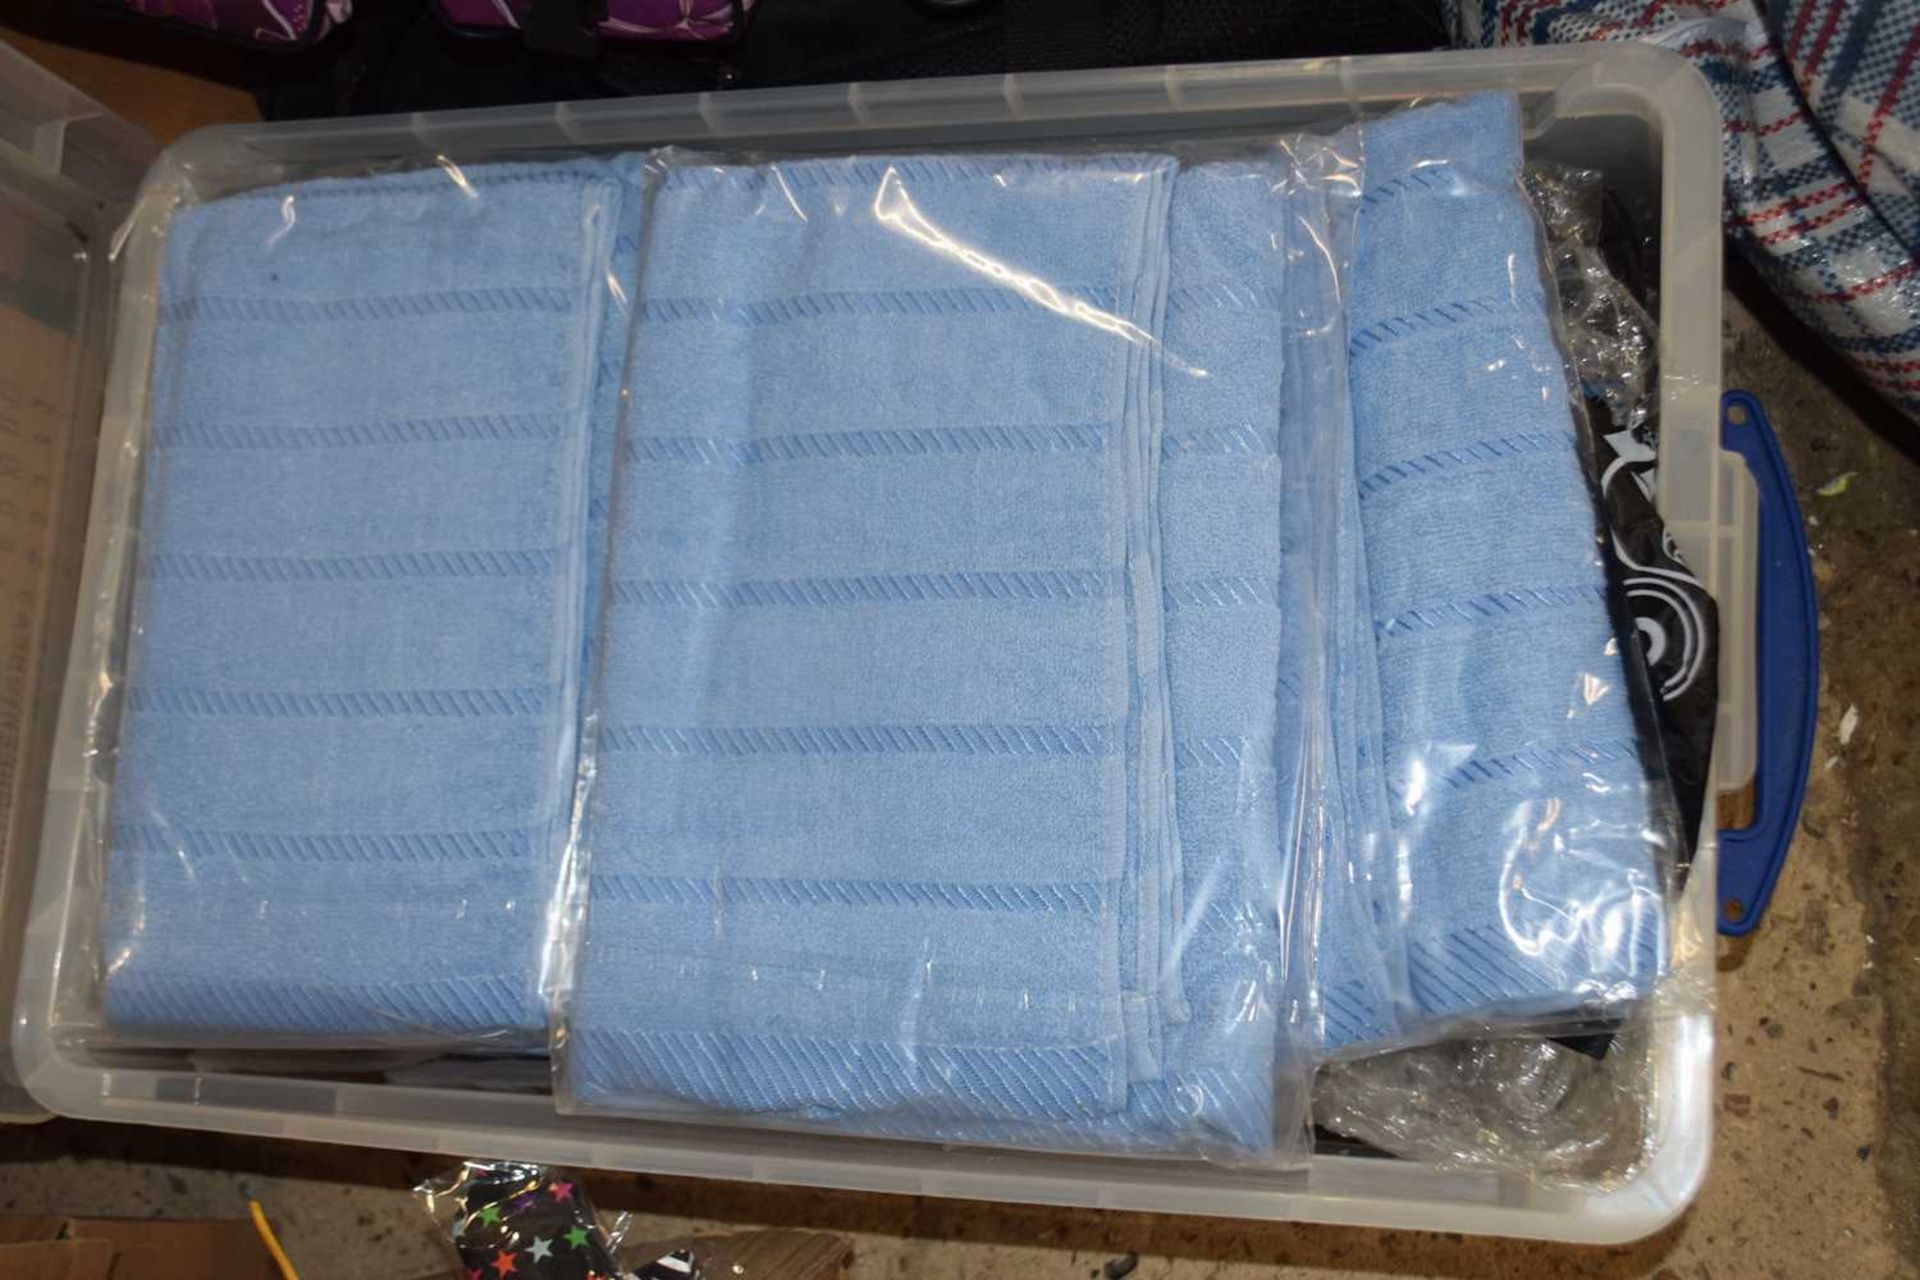 Mixed box containing towels and a quantity of bags